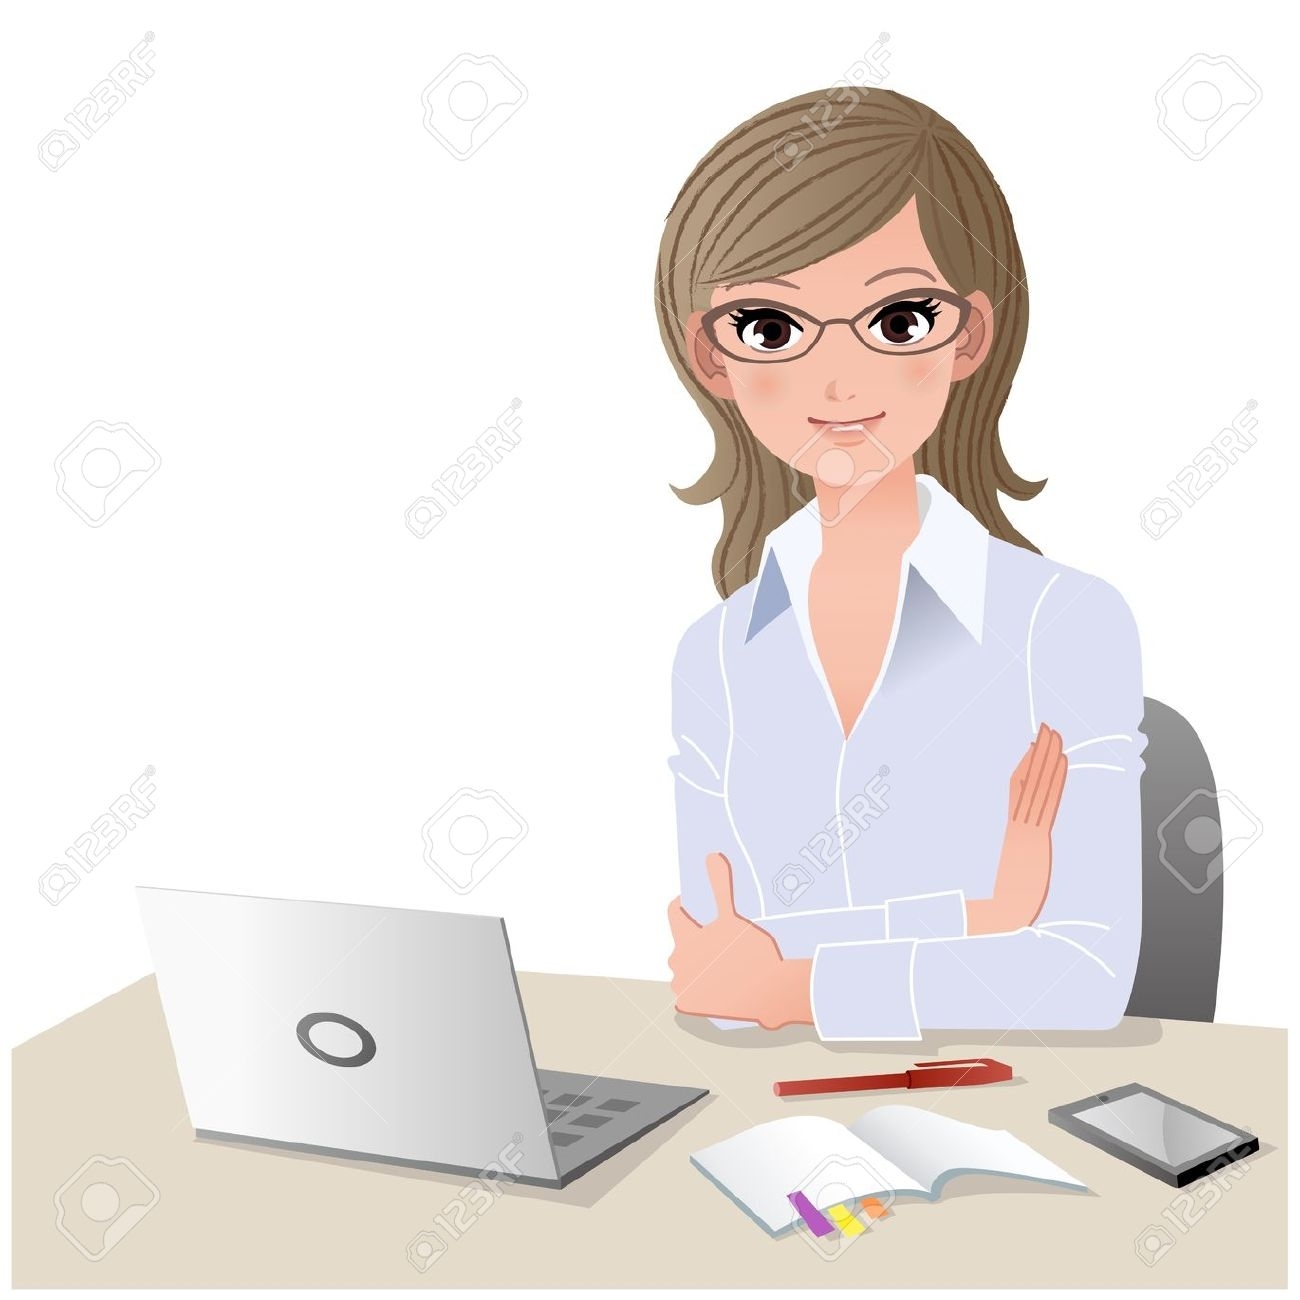 office worker clipart - Clip Art Library